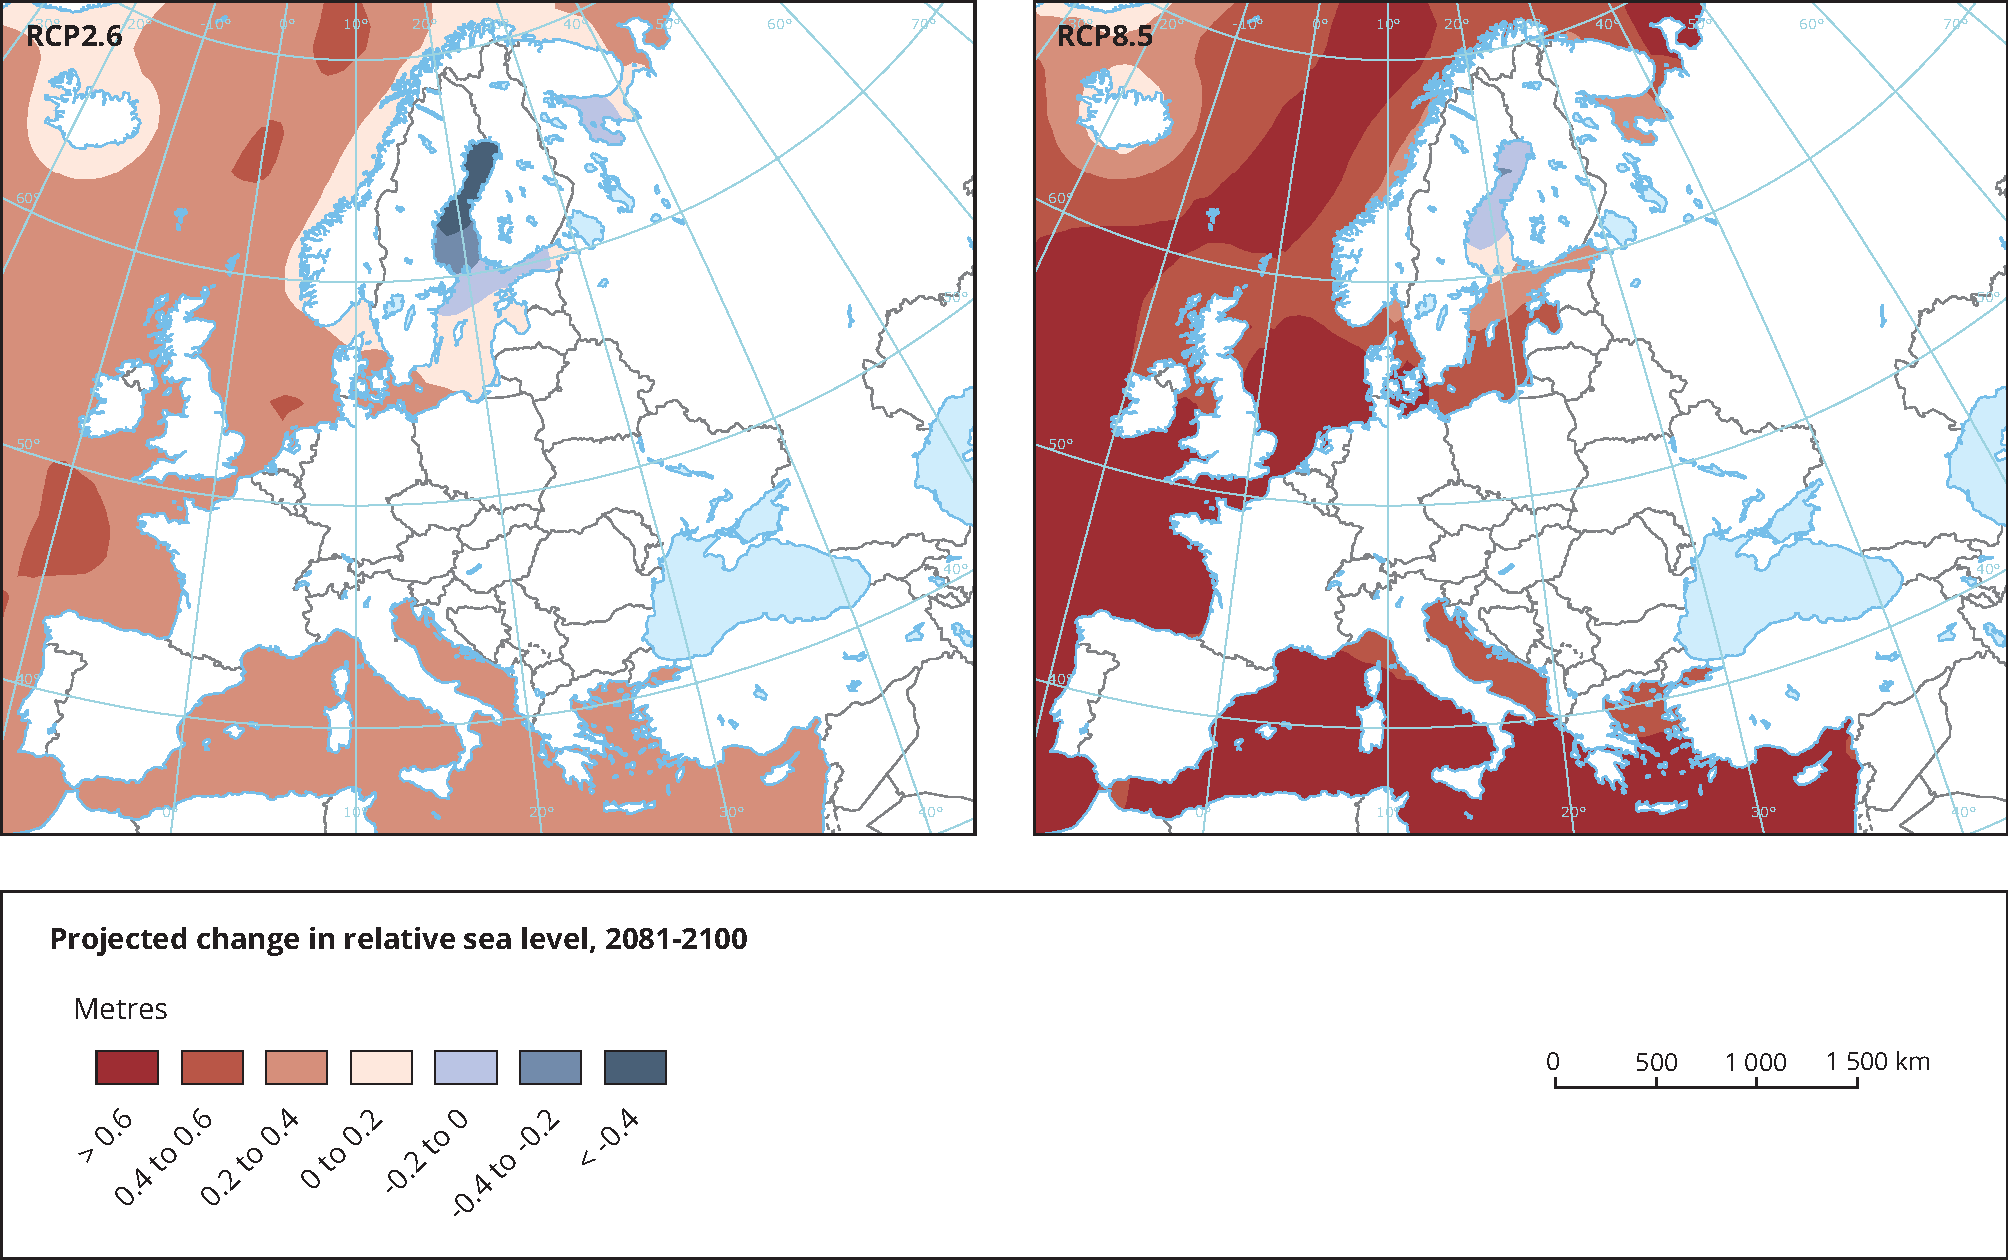 Projected change in sea level 2081-2100